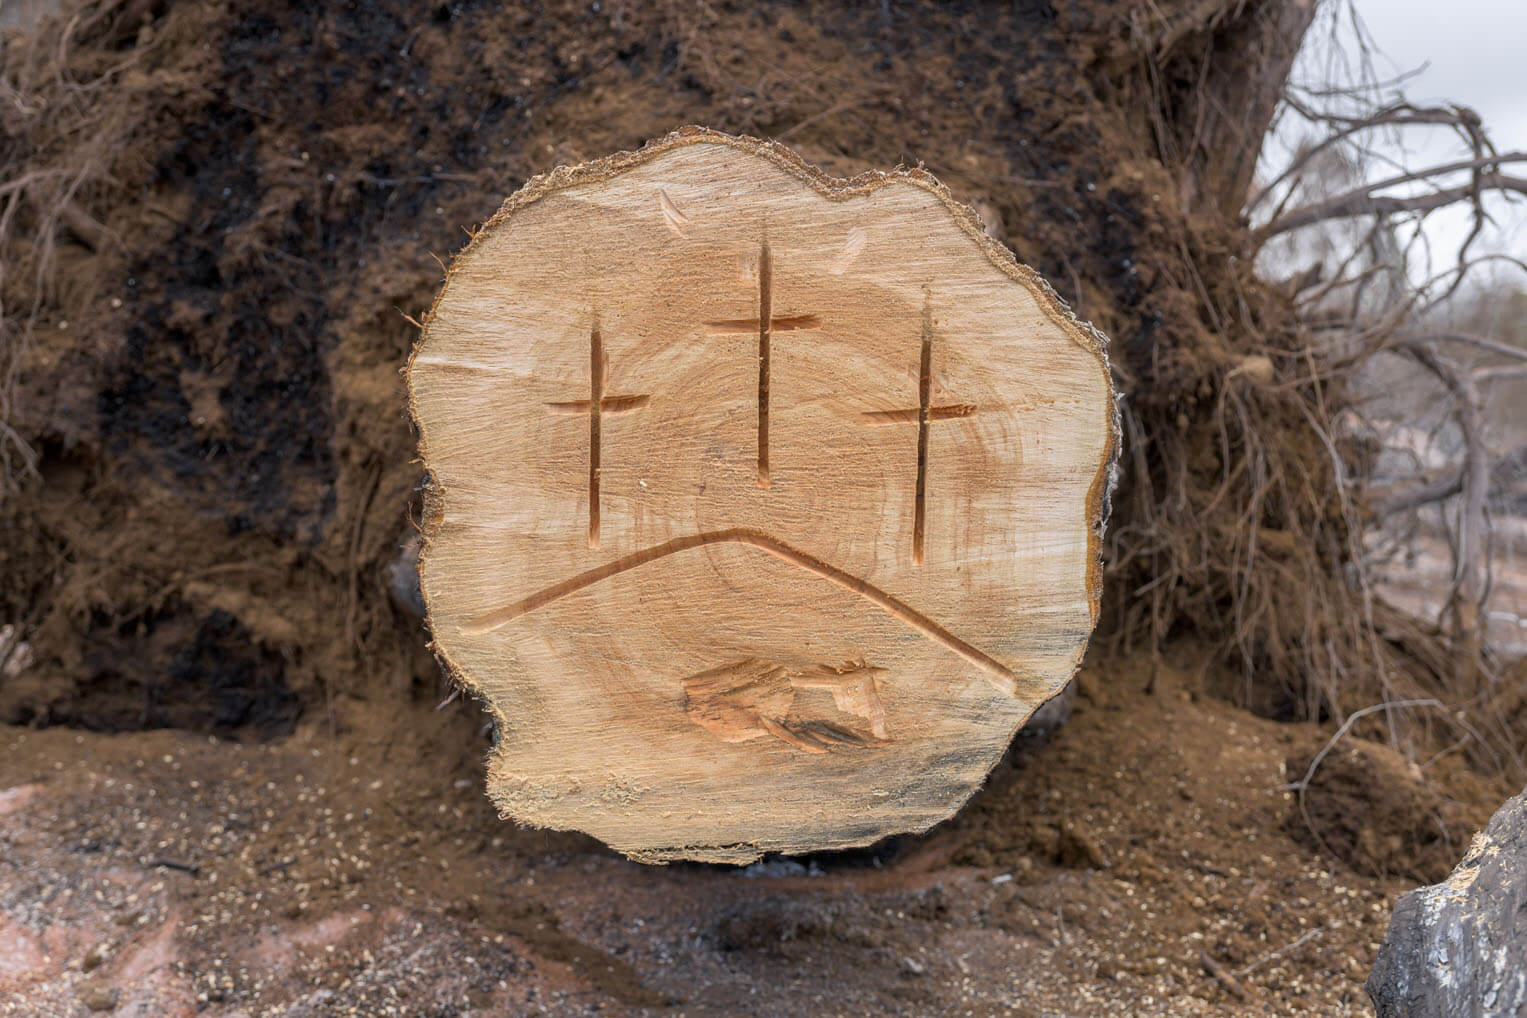 An art-savvy volunteer carved crosses into the stump of a cut tree.